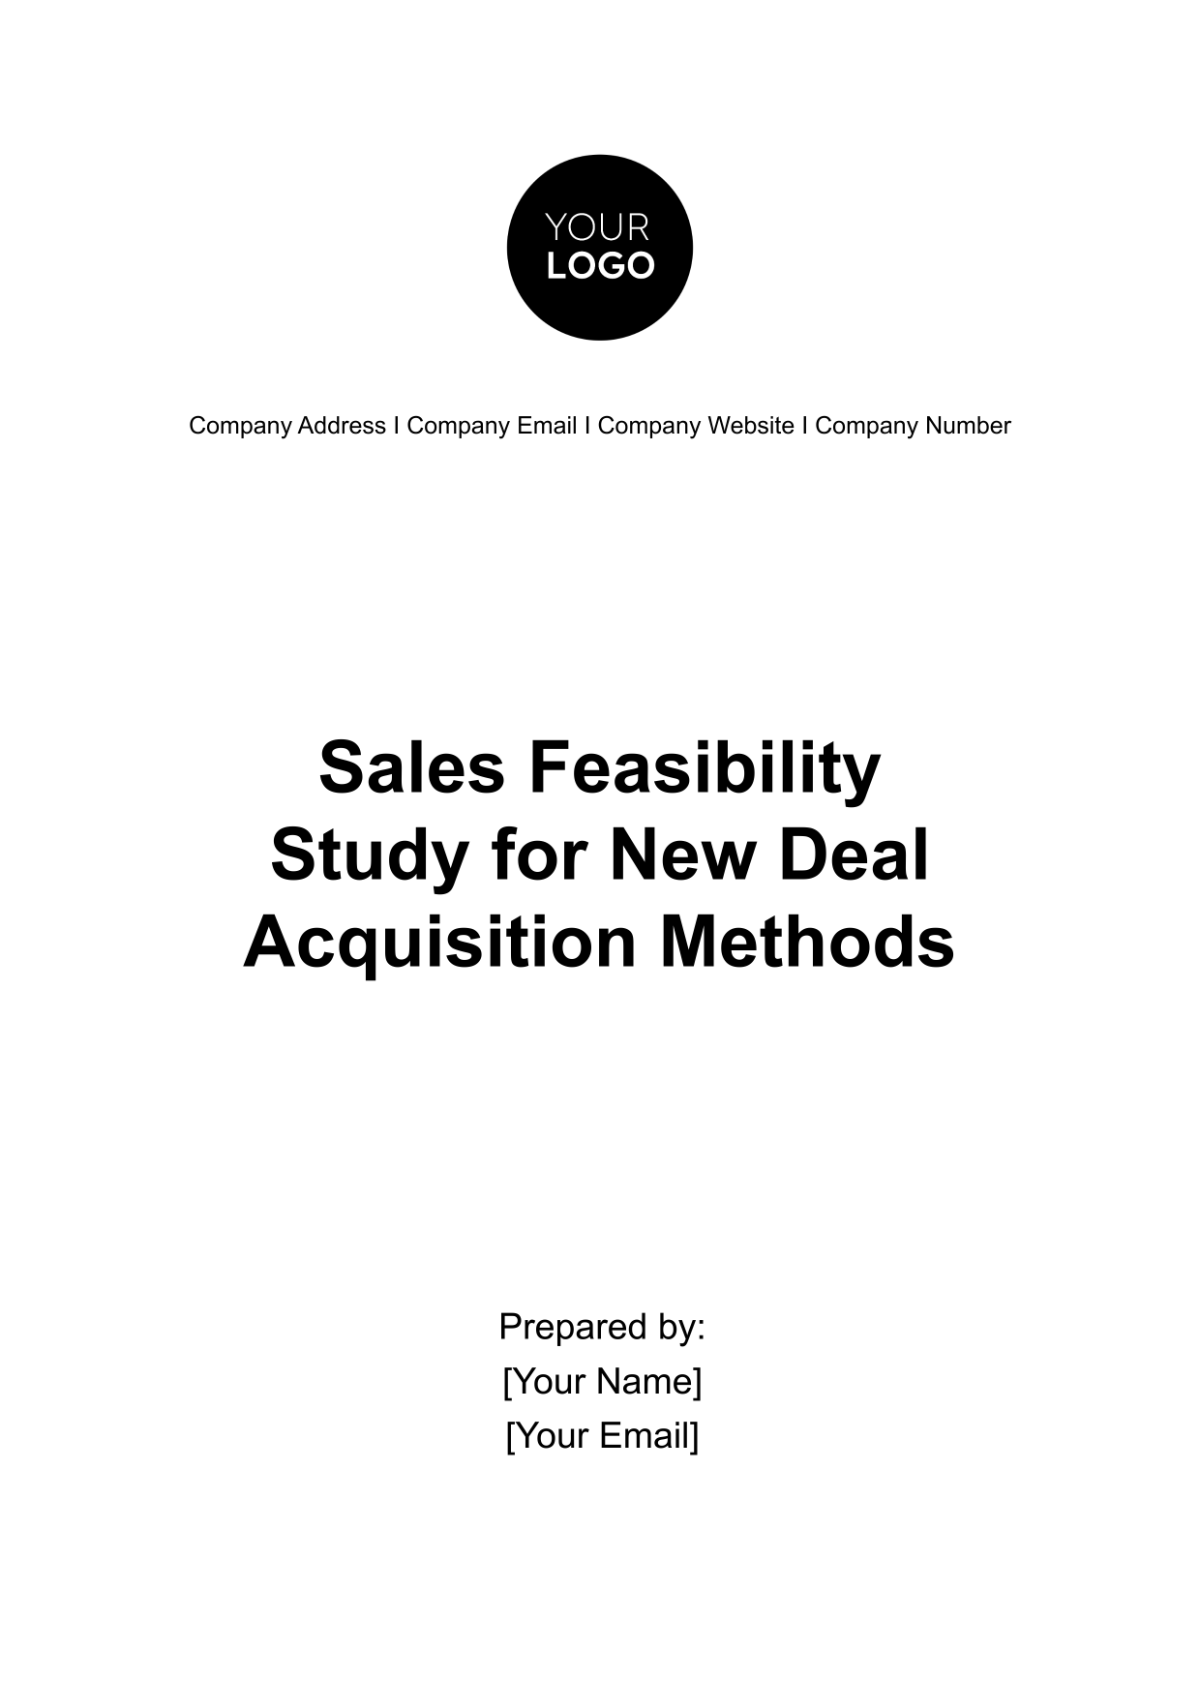 Sales Feasibility Study for New Deal Acquisition Methods Template